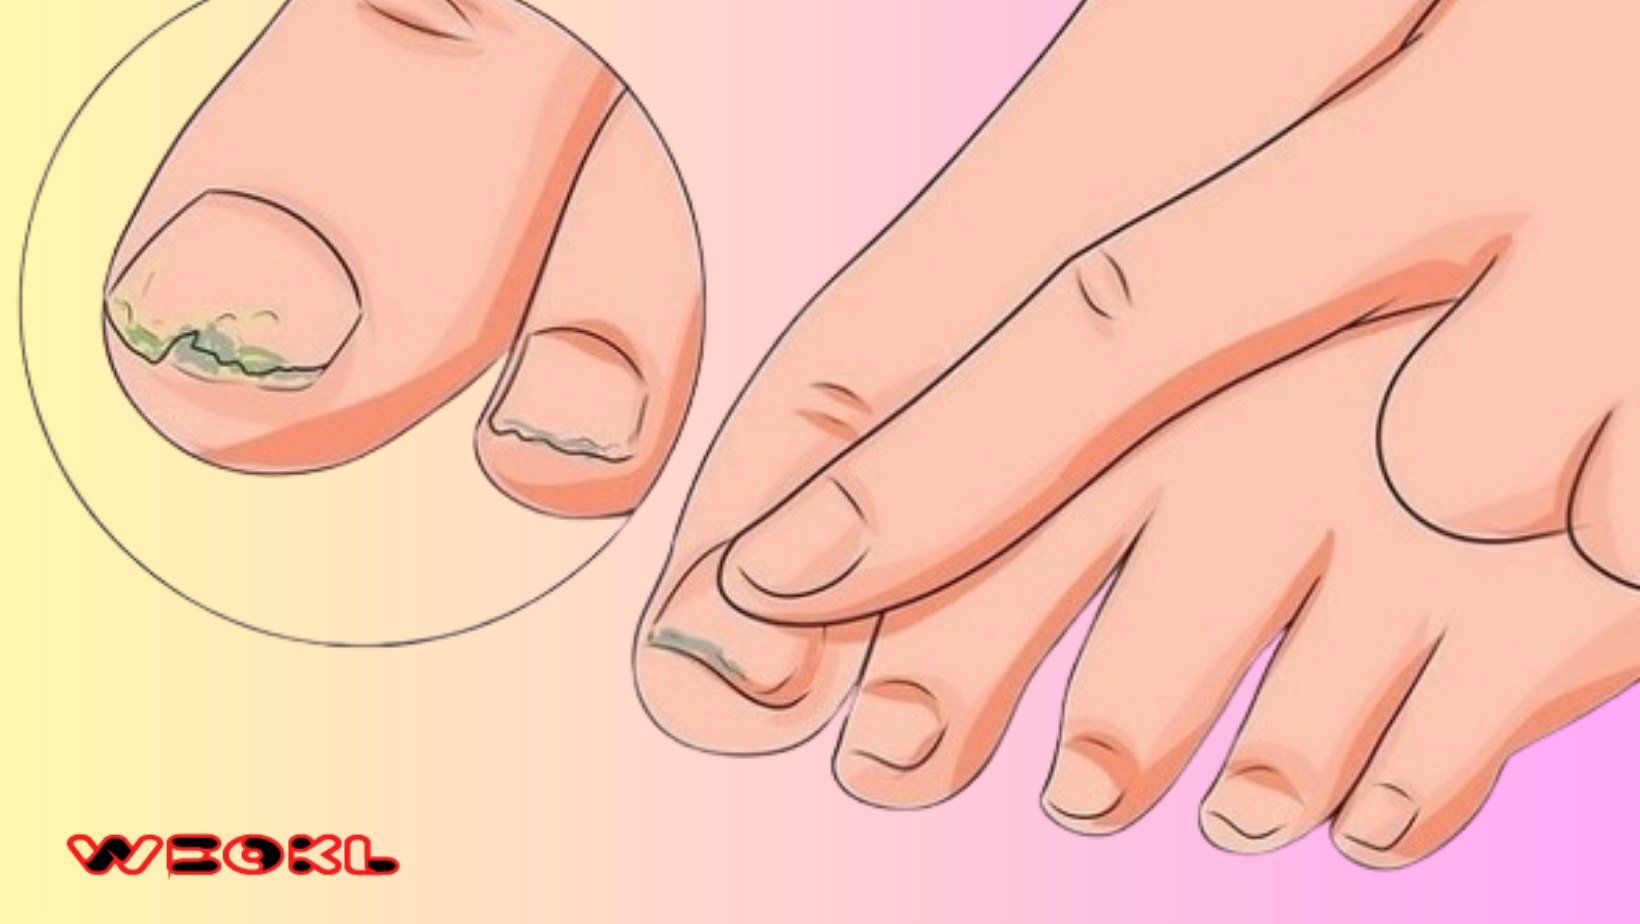 How to get rid of painful toenails without a doctor